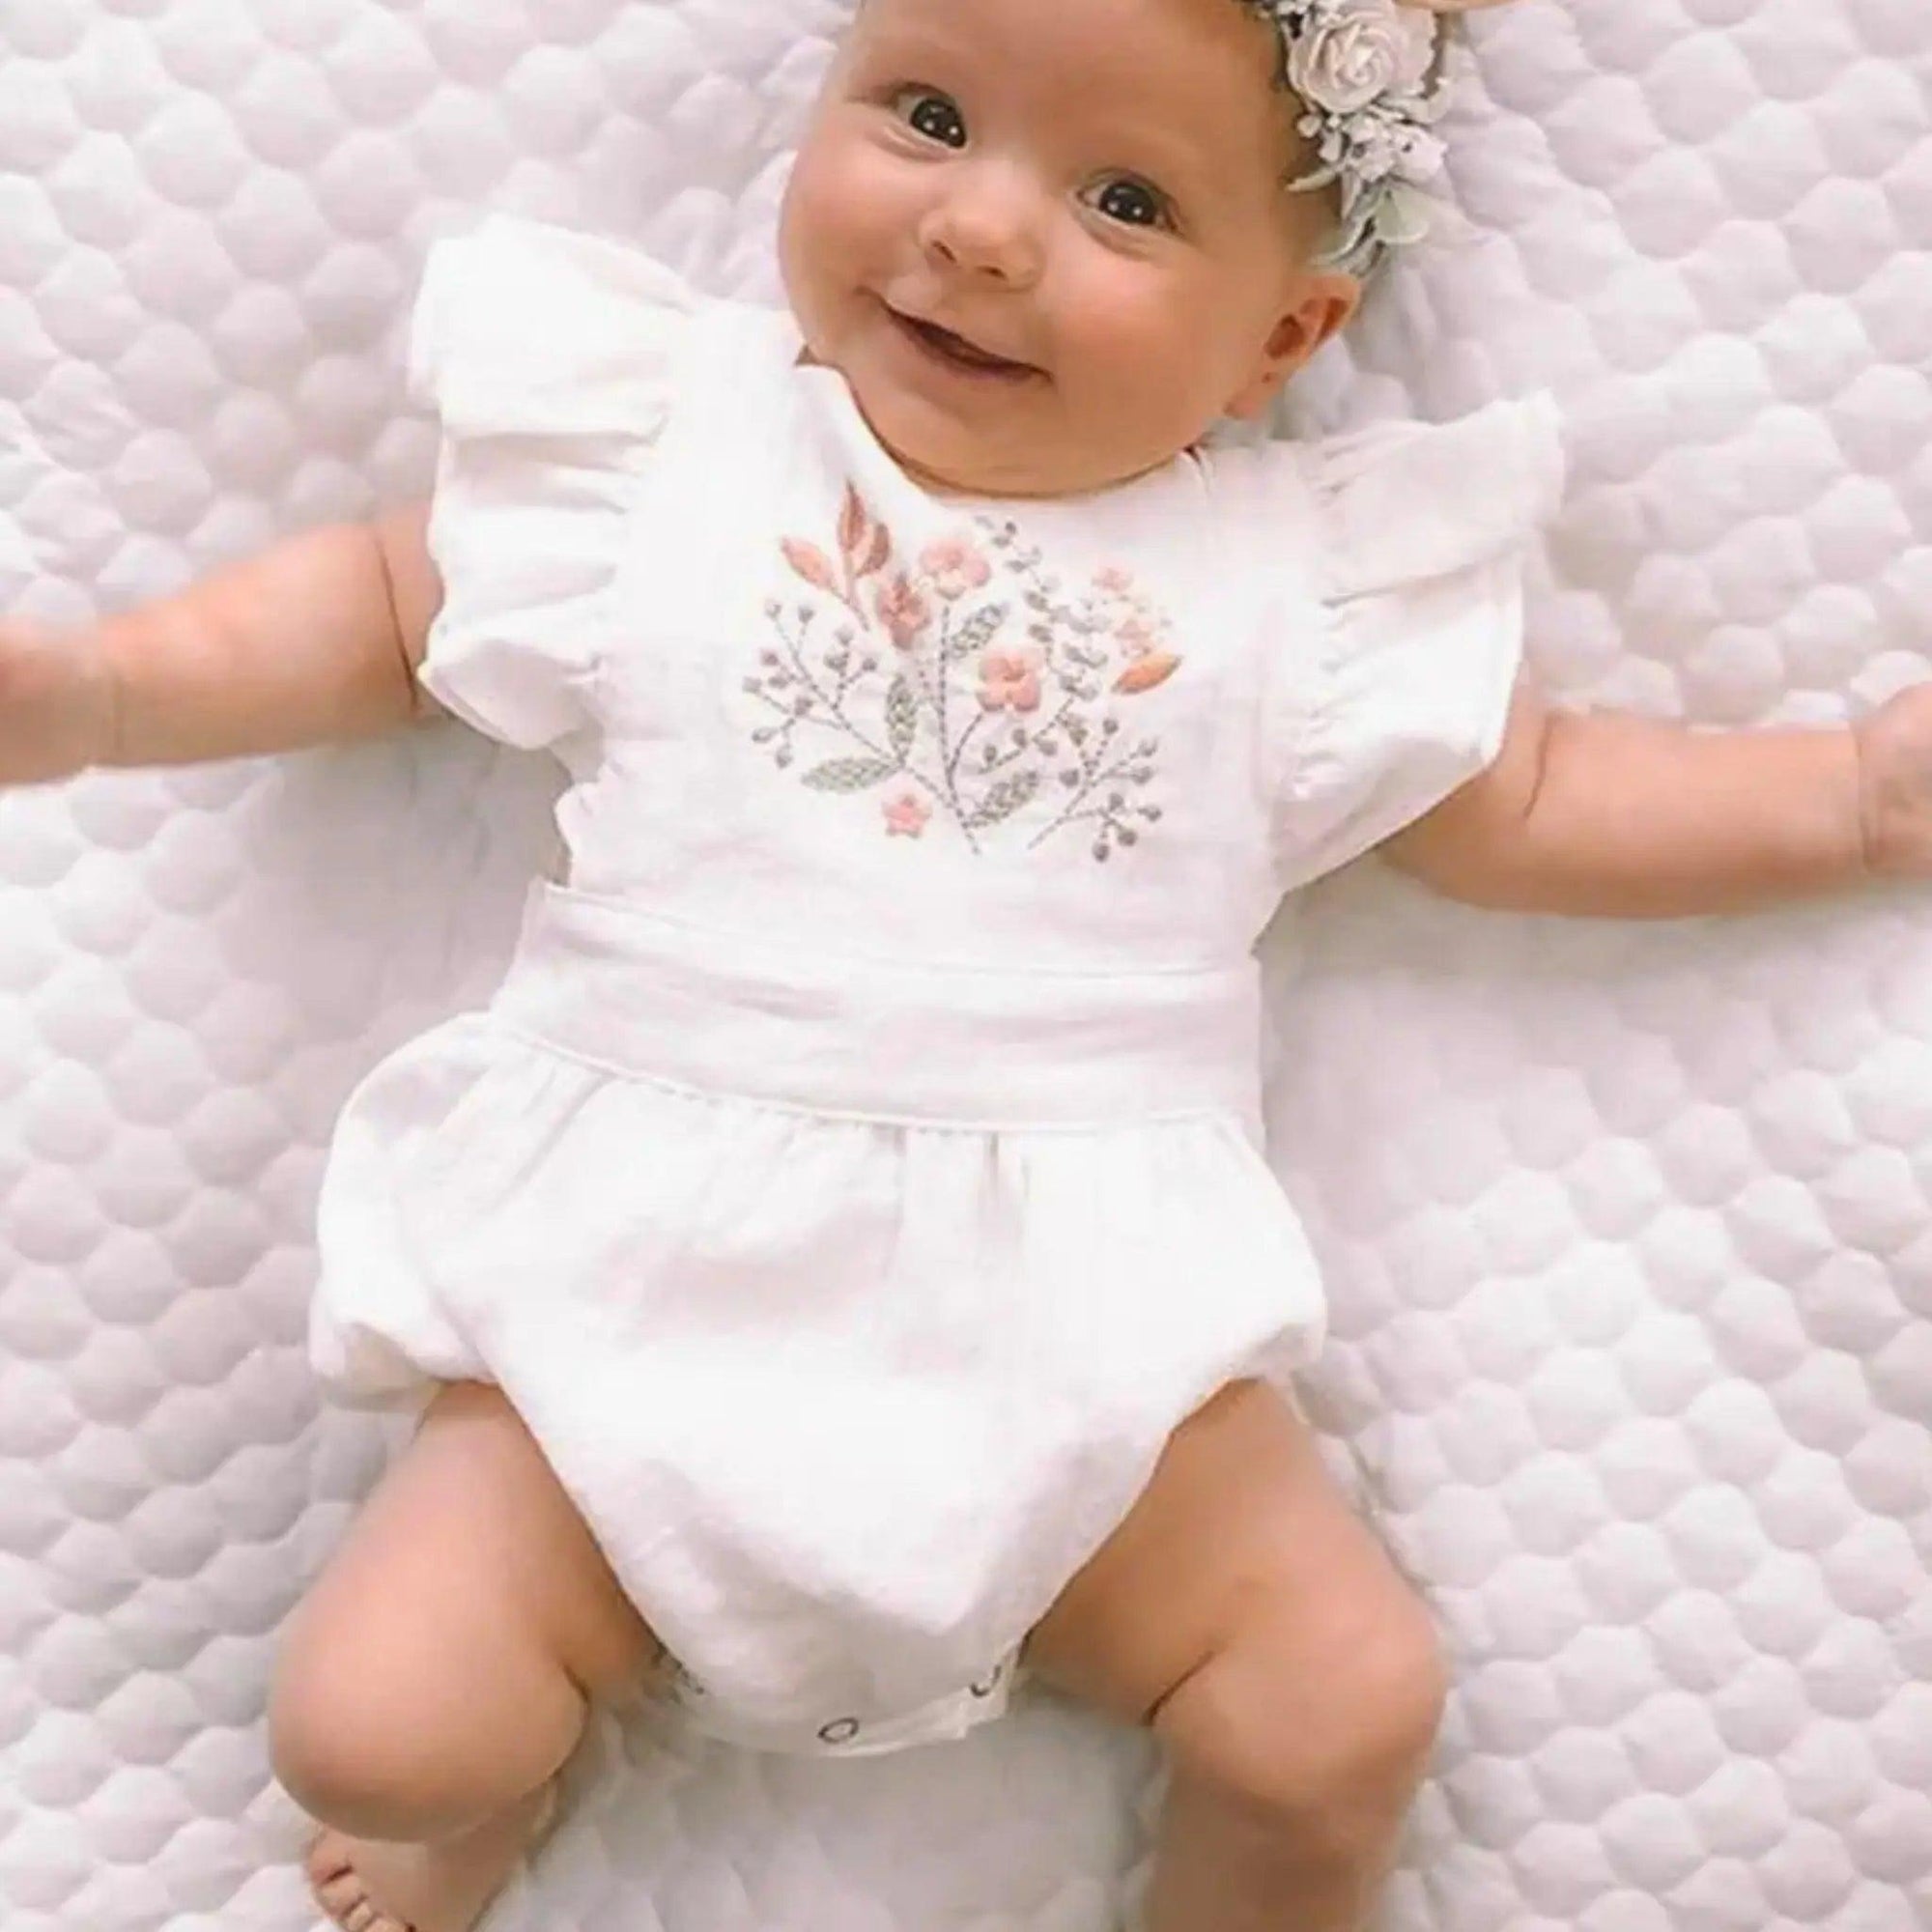 Baby Girls White Floral Embroidered Ruffled Summer Romper, Main Image